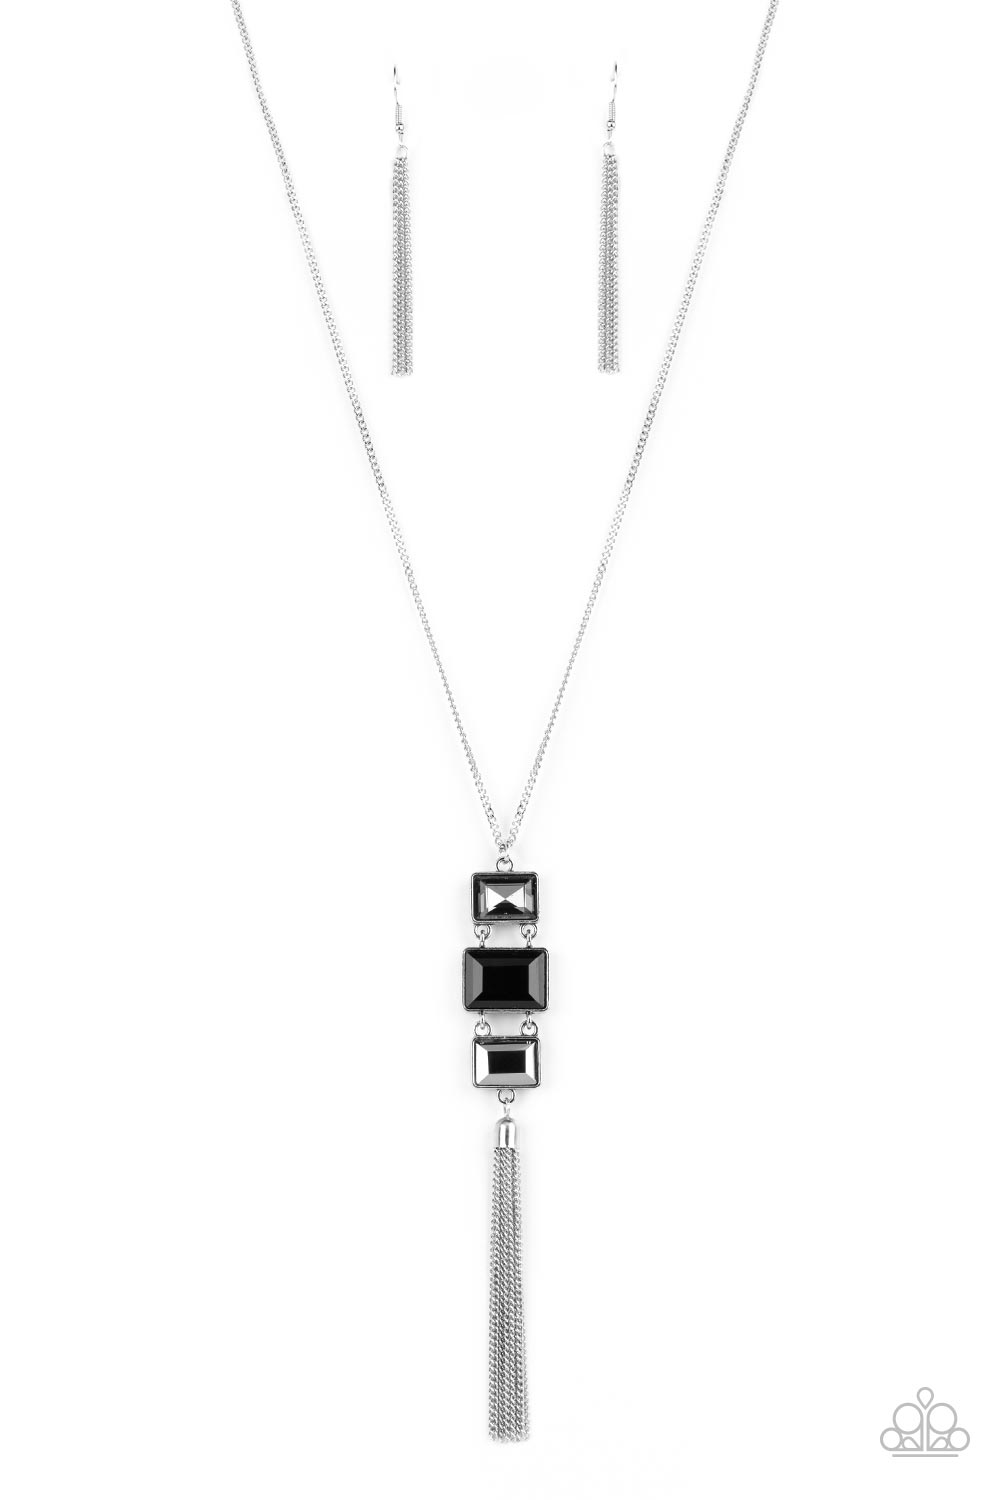 Uptown Totem - Black - Hematite - Silver Gem Necklace - Paparazzi Accessories - A sparkly collection of mismatched smoky, black, and hematite rectangular gems stack at the bottom of a lengthened silver chain, creating a glamorous pendant. A dainty silver chain tassel swings from the bottom, adding glamorous movement to the modern display. 